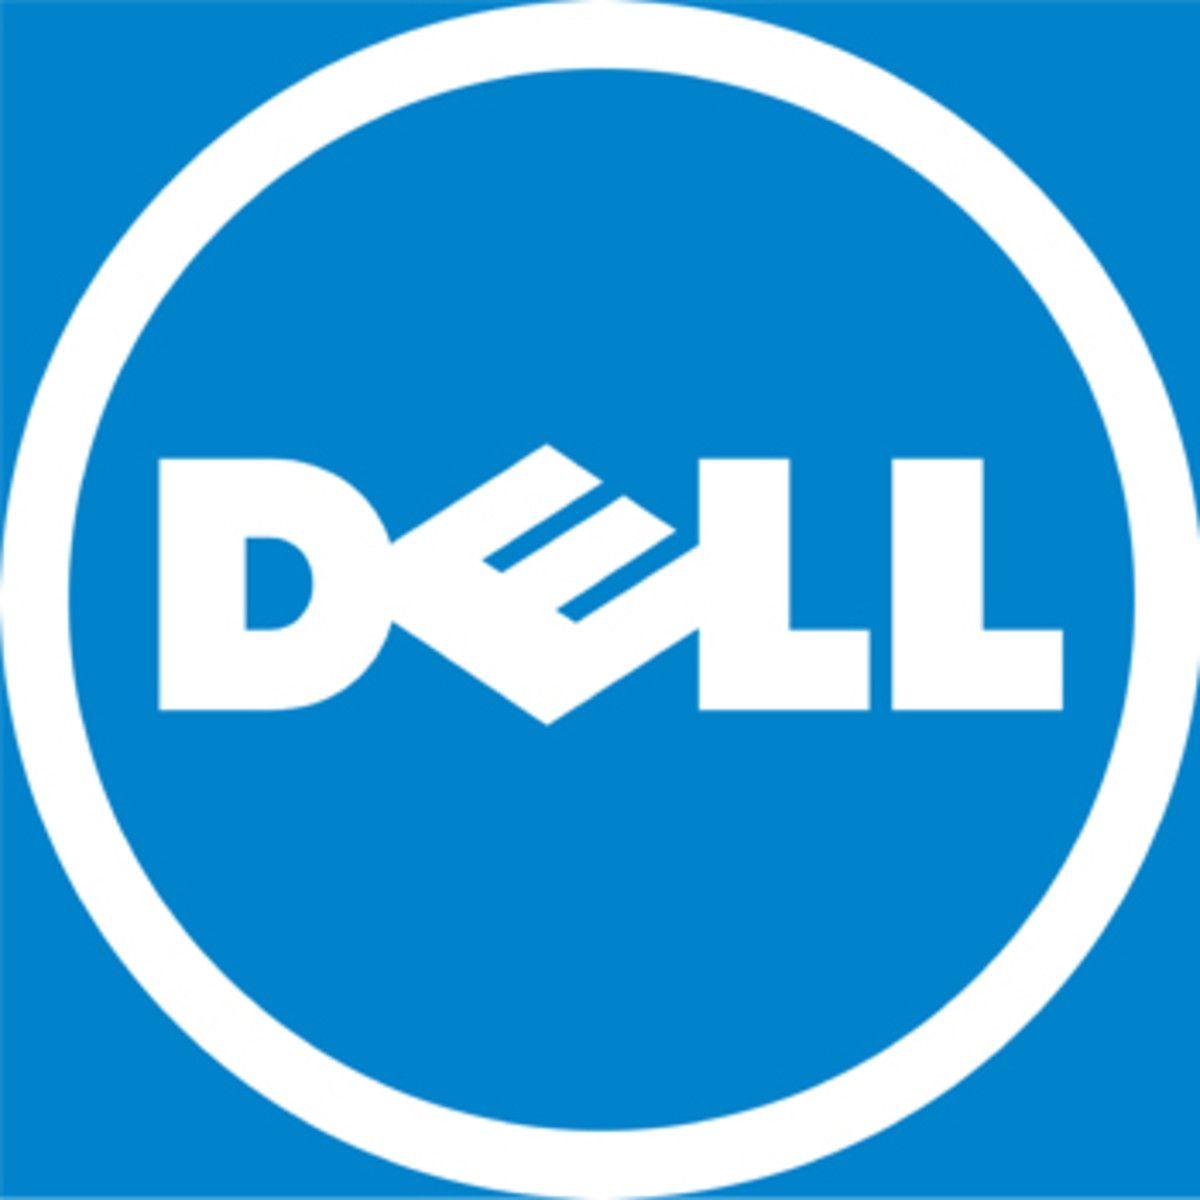 Dell Technologies Logo - Why Dell has changed its name to Dell Technologies - PC Retail